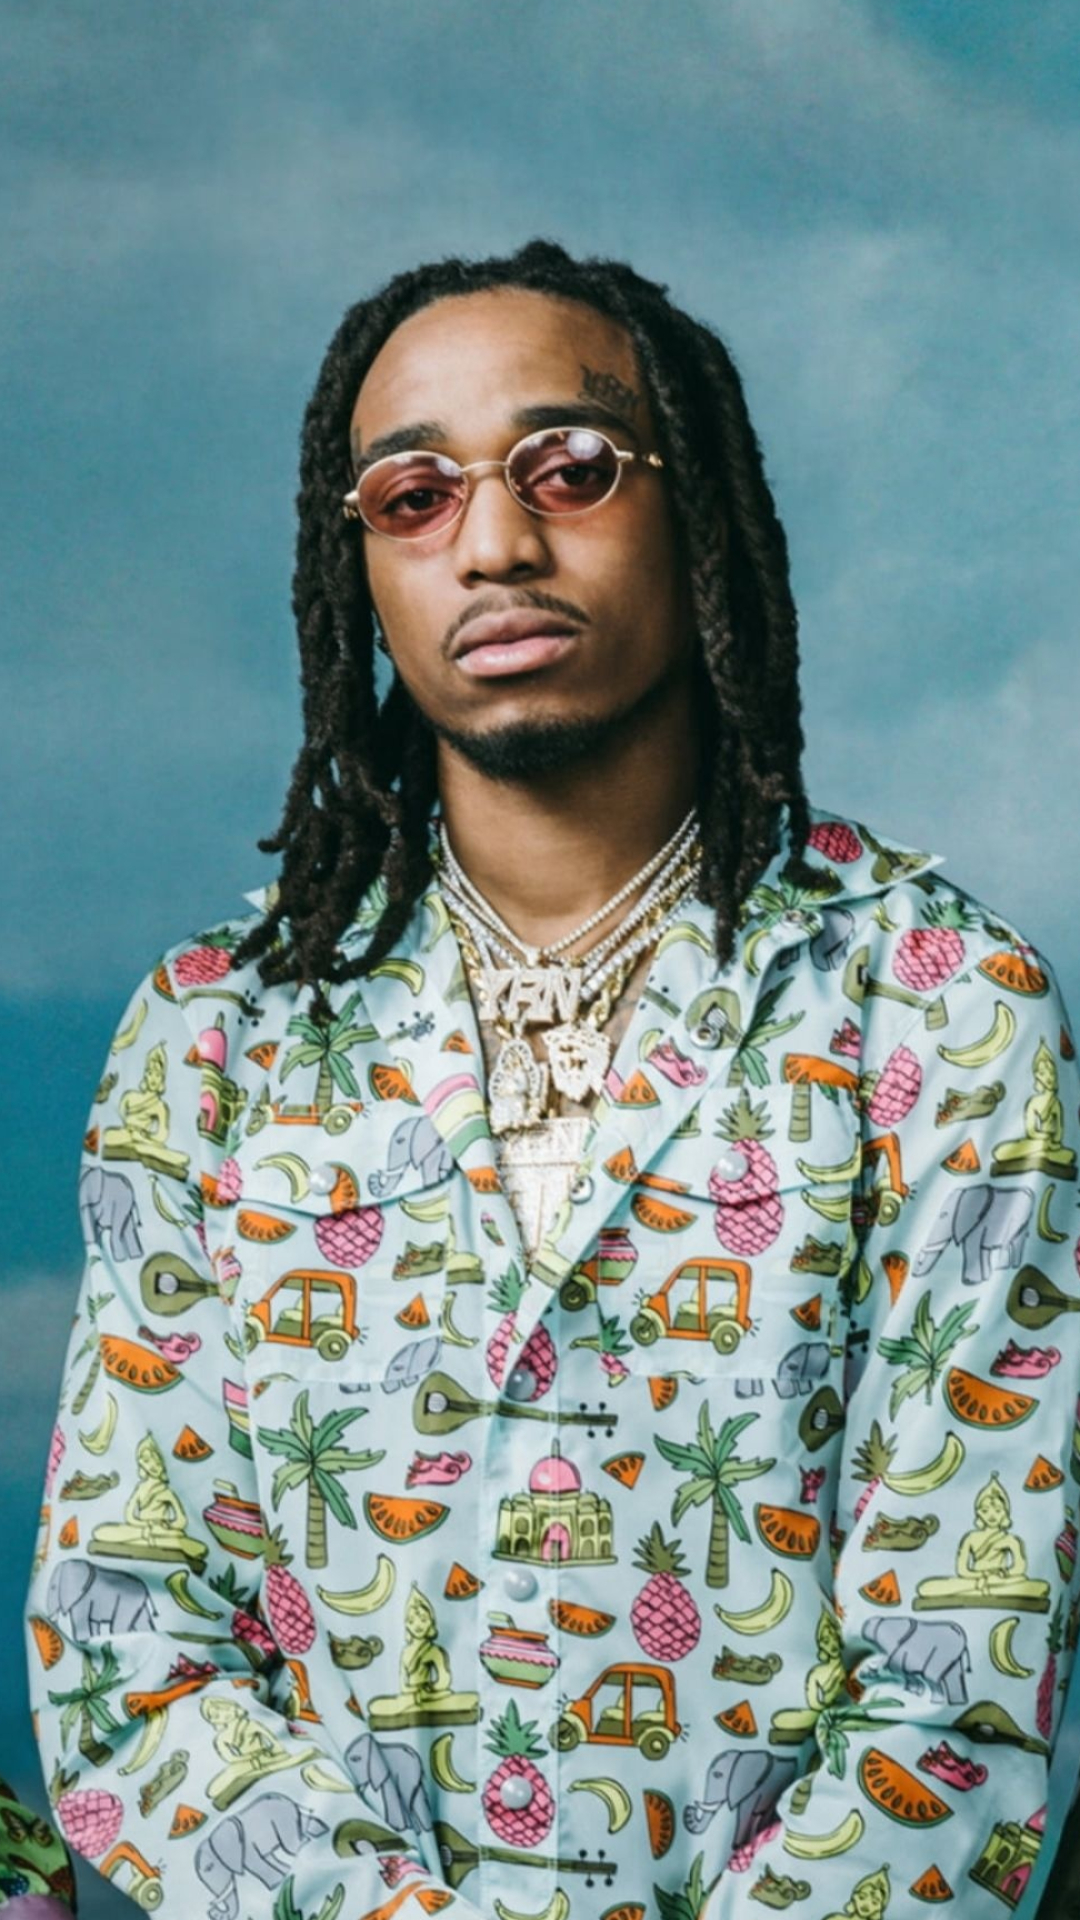 Migos photos, Profile pictures, 1080x1920 Full HD Handy